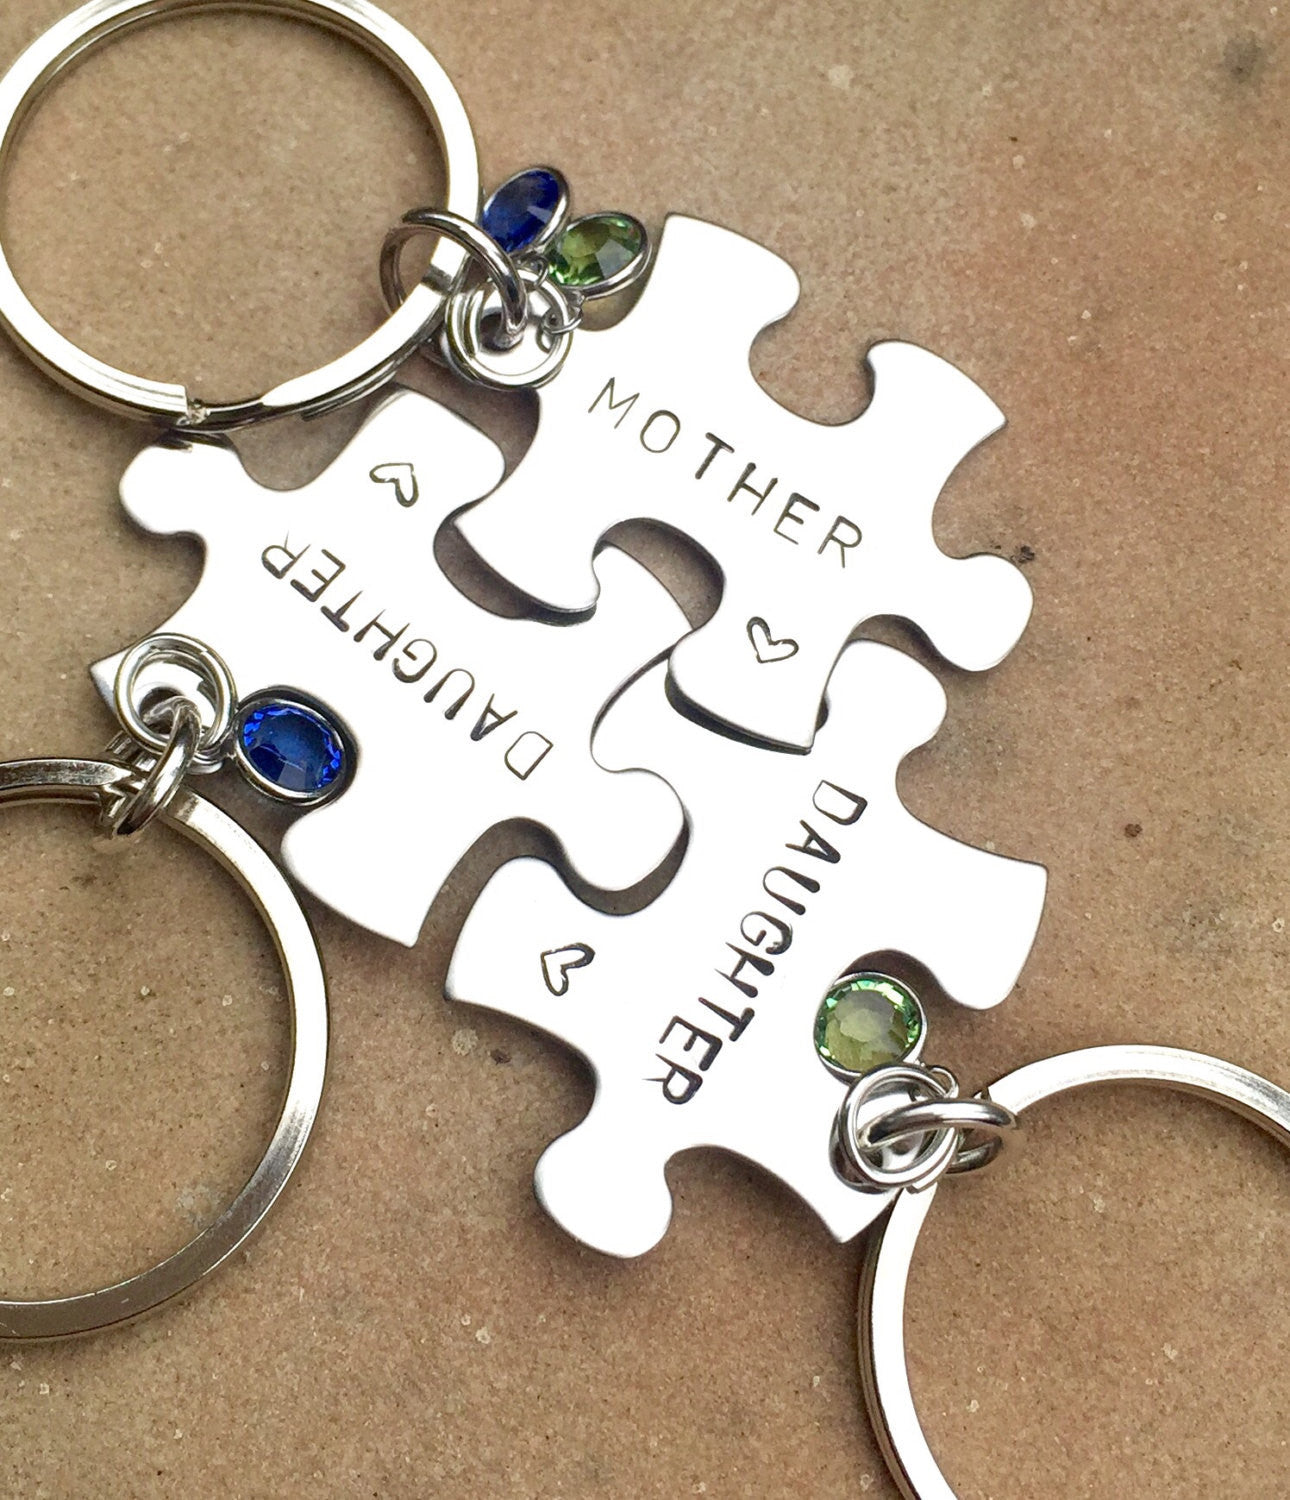 Mother Daughter Gifts, Mother Daughter Puzzle Key chains, Gifts for mom, Gifts for Daughter, natashalaoha - Natashaaloha, jewelry, bracelets, necklace, keychains, fishing lures, gifts for men, charms, personalized, 